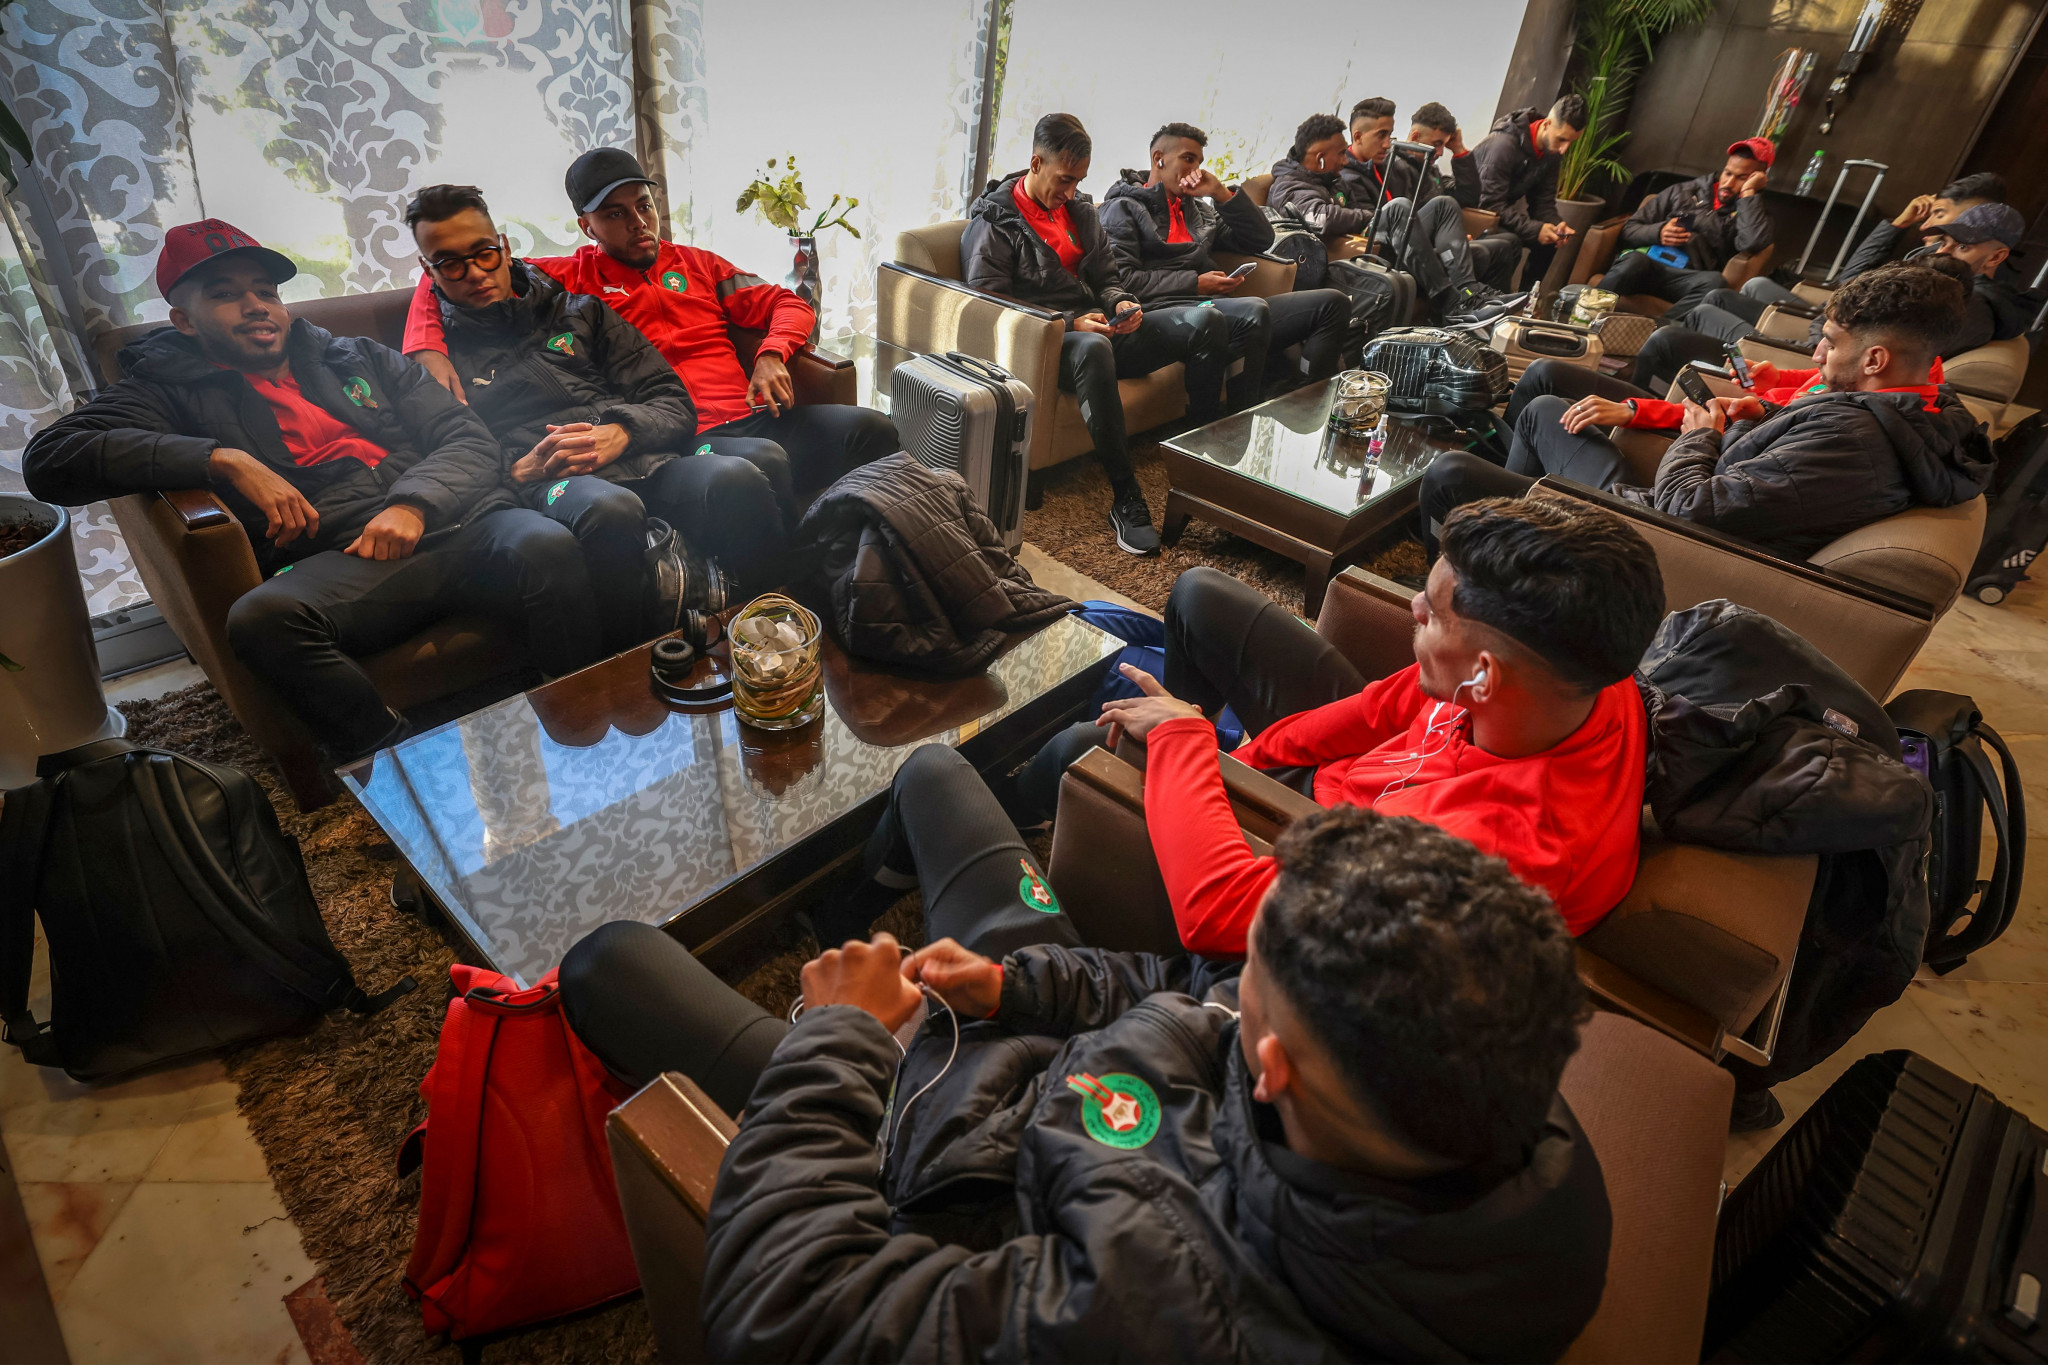 Morocco's players wait at the airport in the hope of travelling to Algeria to participate at the African Nations Championship ©Getty Images  